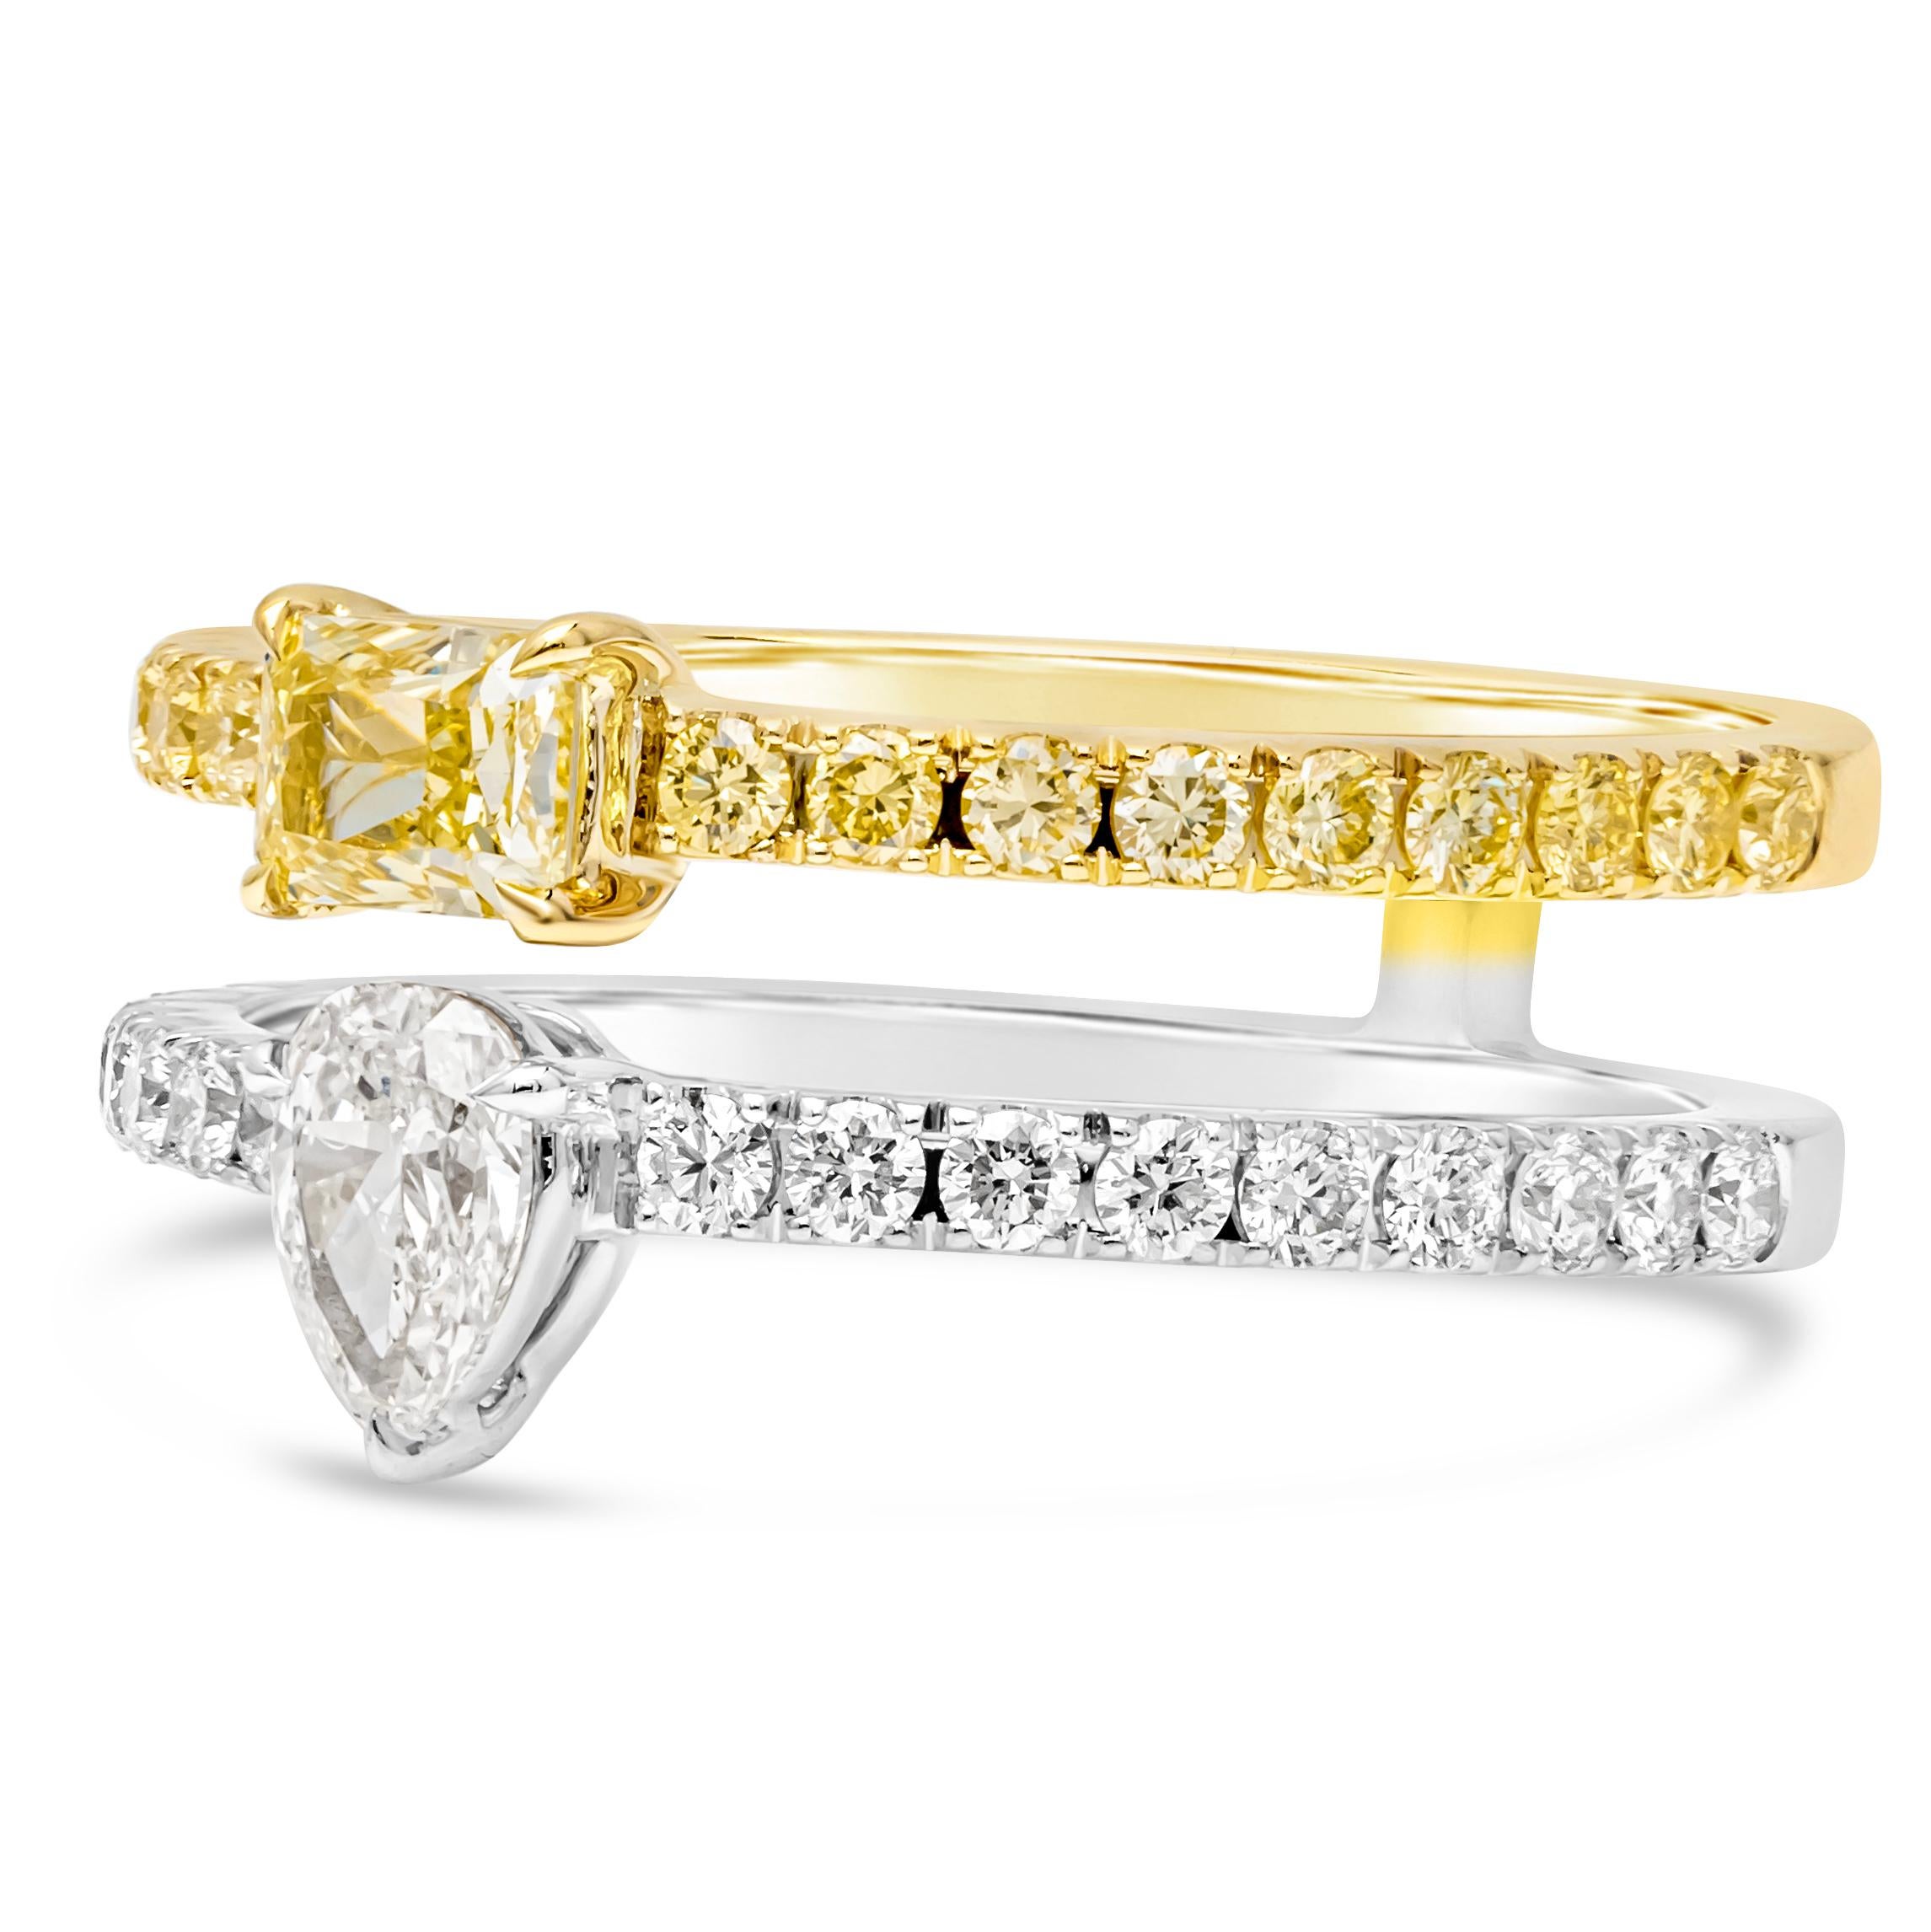 This exquisite double band fashion ring features a stunning combination of elegance and vibrancy. One band showcases fancy color cushion cut diamond center stone, accented with pave round fancy color diamonds, set in a 18k yellow gold. The other